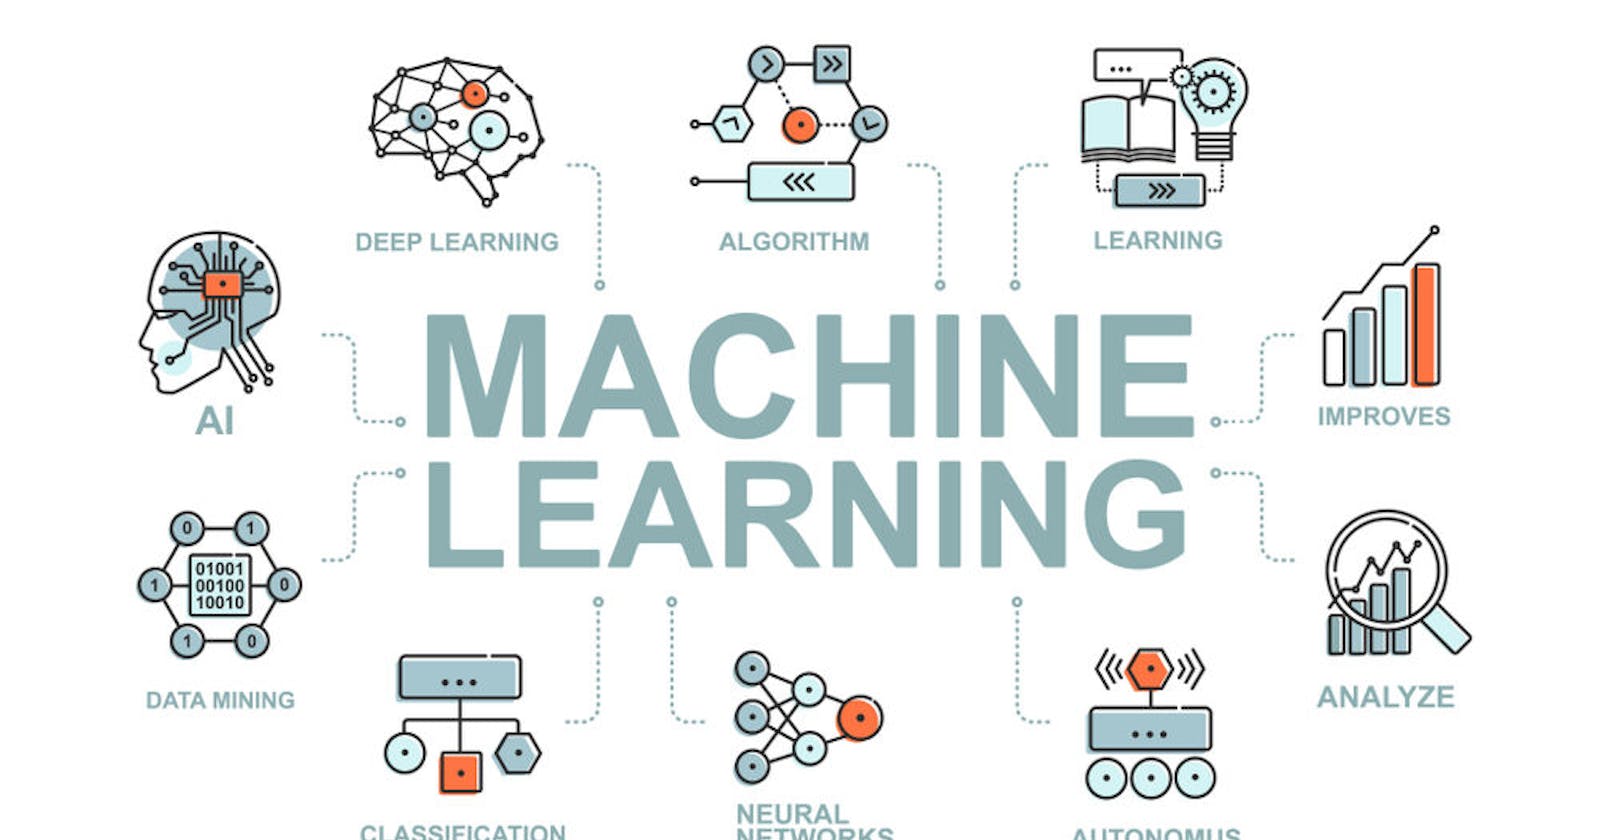 10 Essential Machine Learning Algorithms Every Data Scientist Should Know